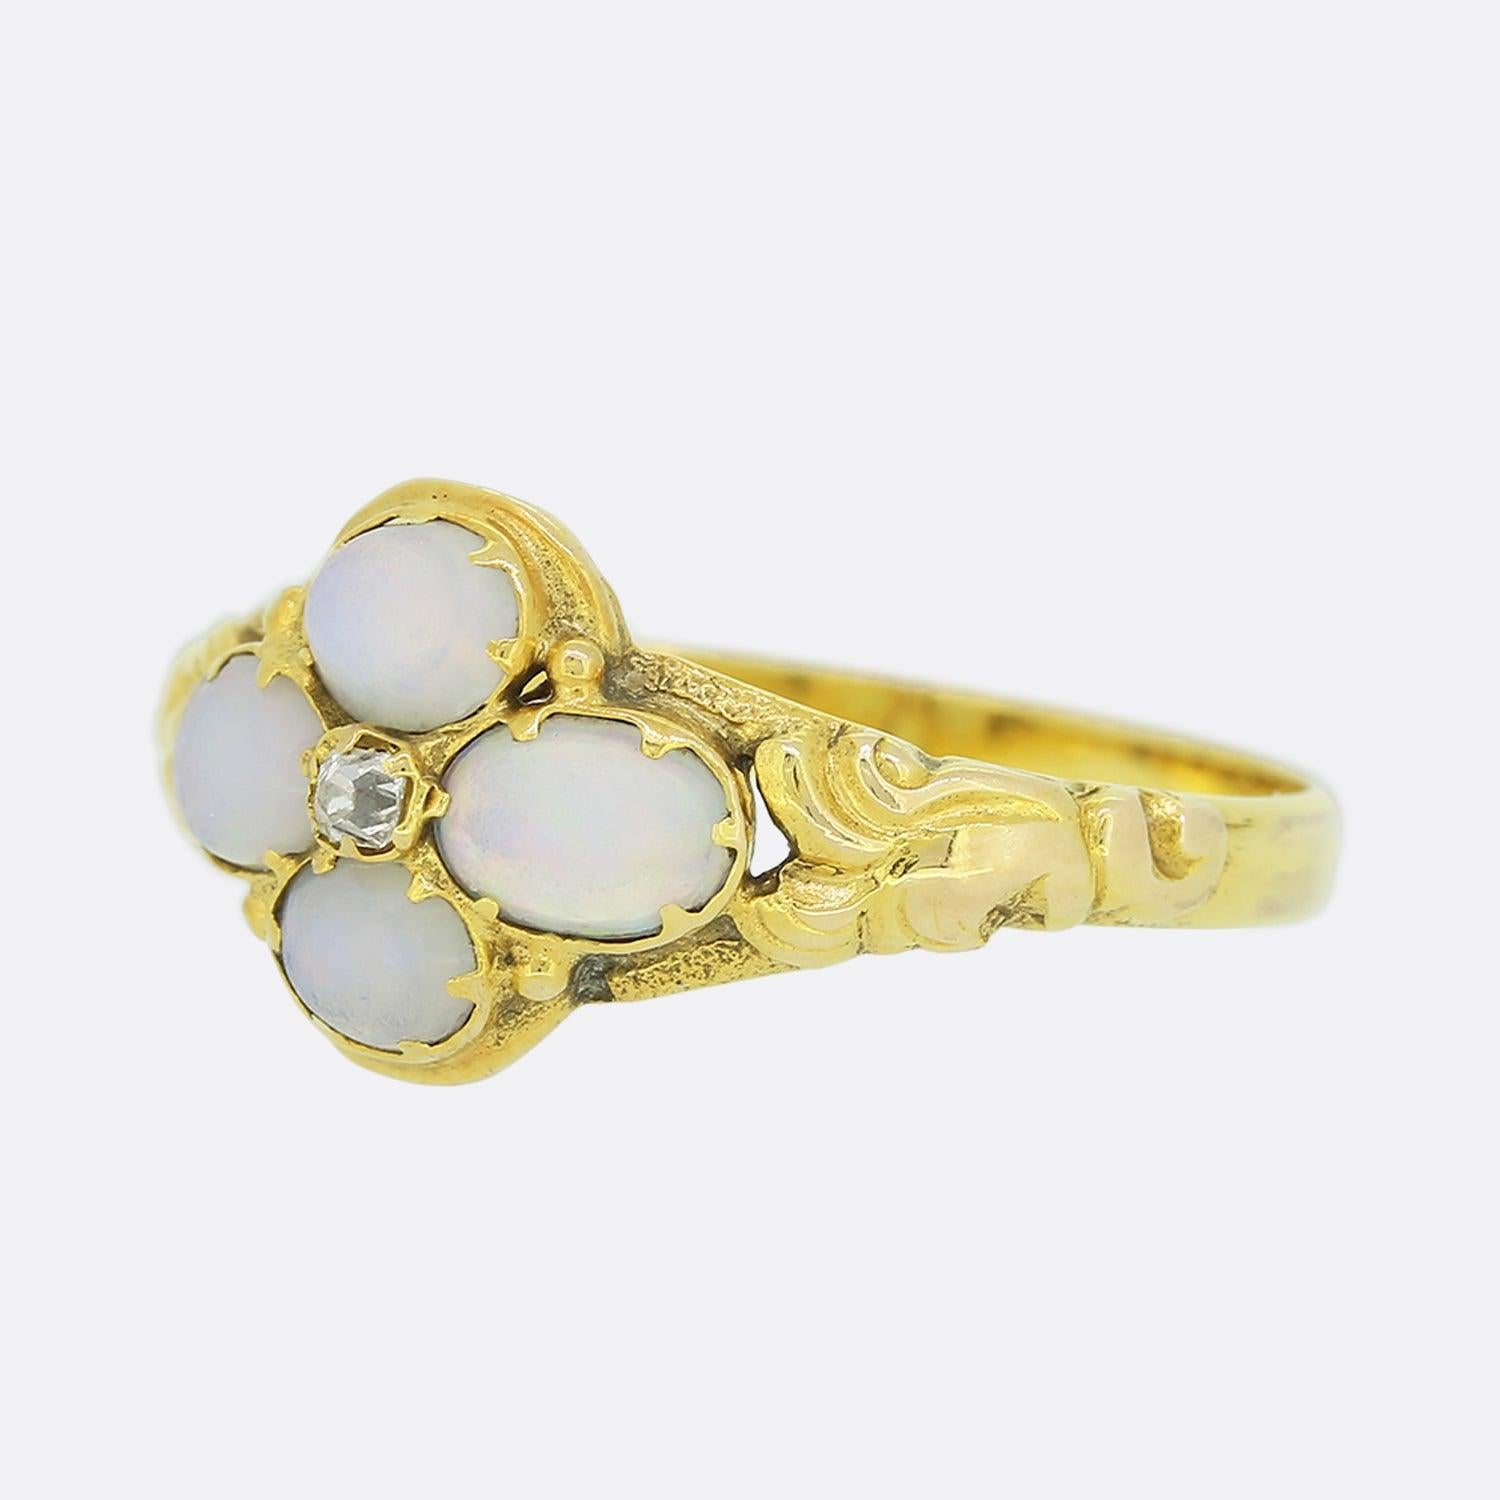 Here we have a Victorian 15ct yellow gold opal and diamond ring. The central old cut diamond is surrounded by 4 lovely opals and the shoulders feature lovely ornate detail.

Condition: Used (Very Good)
Weight: 1.5 grams
Size: M 1/2
Opals: 2 (4mm x